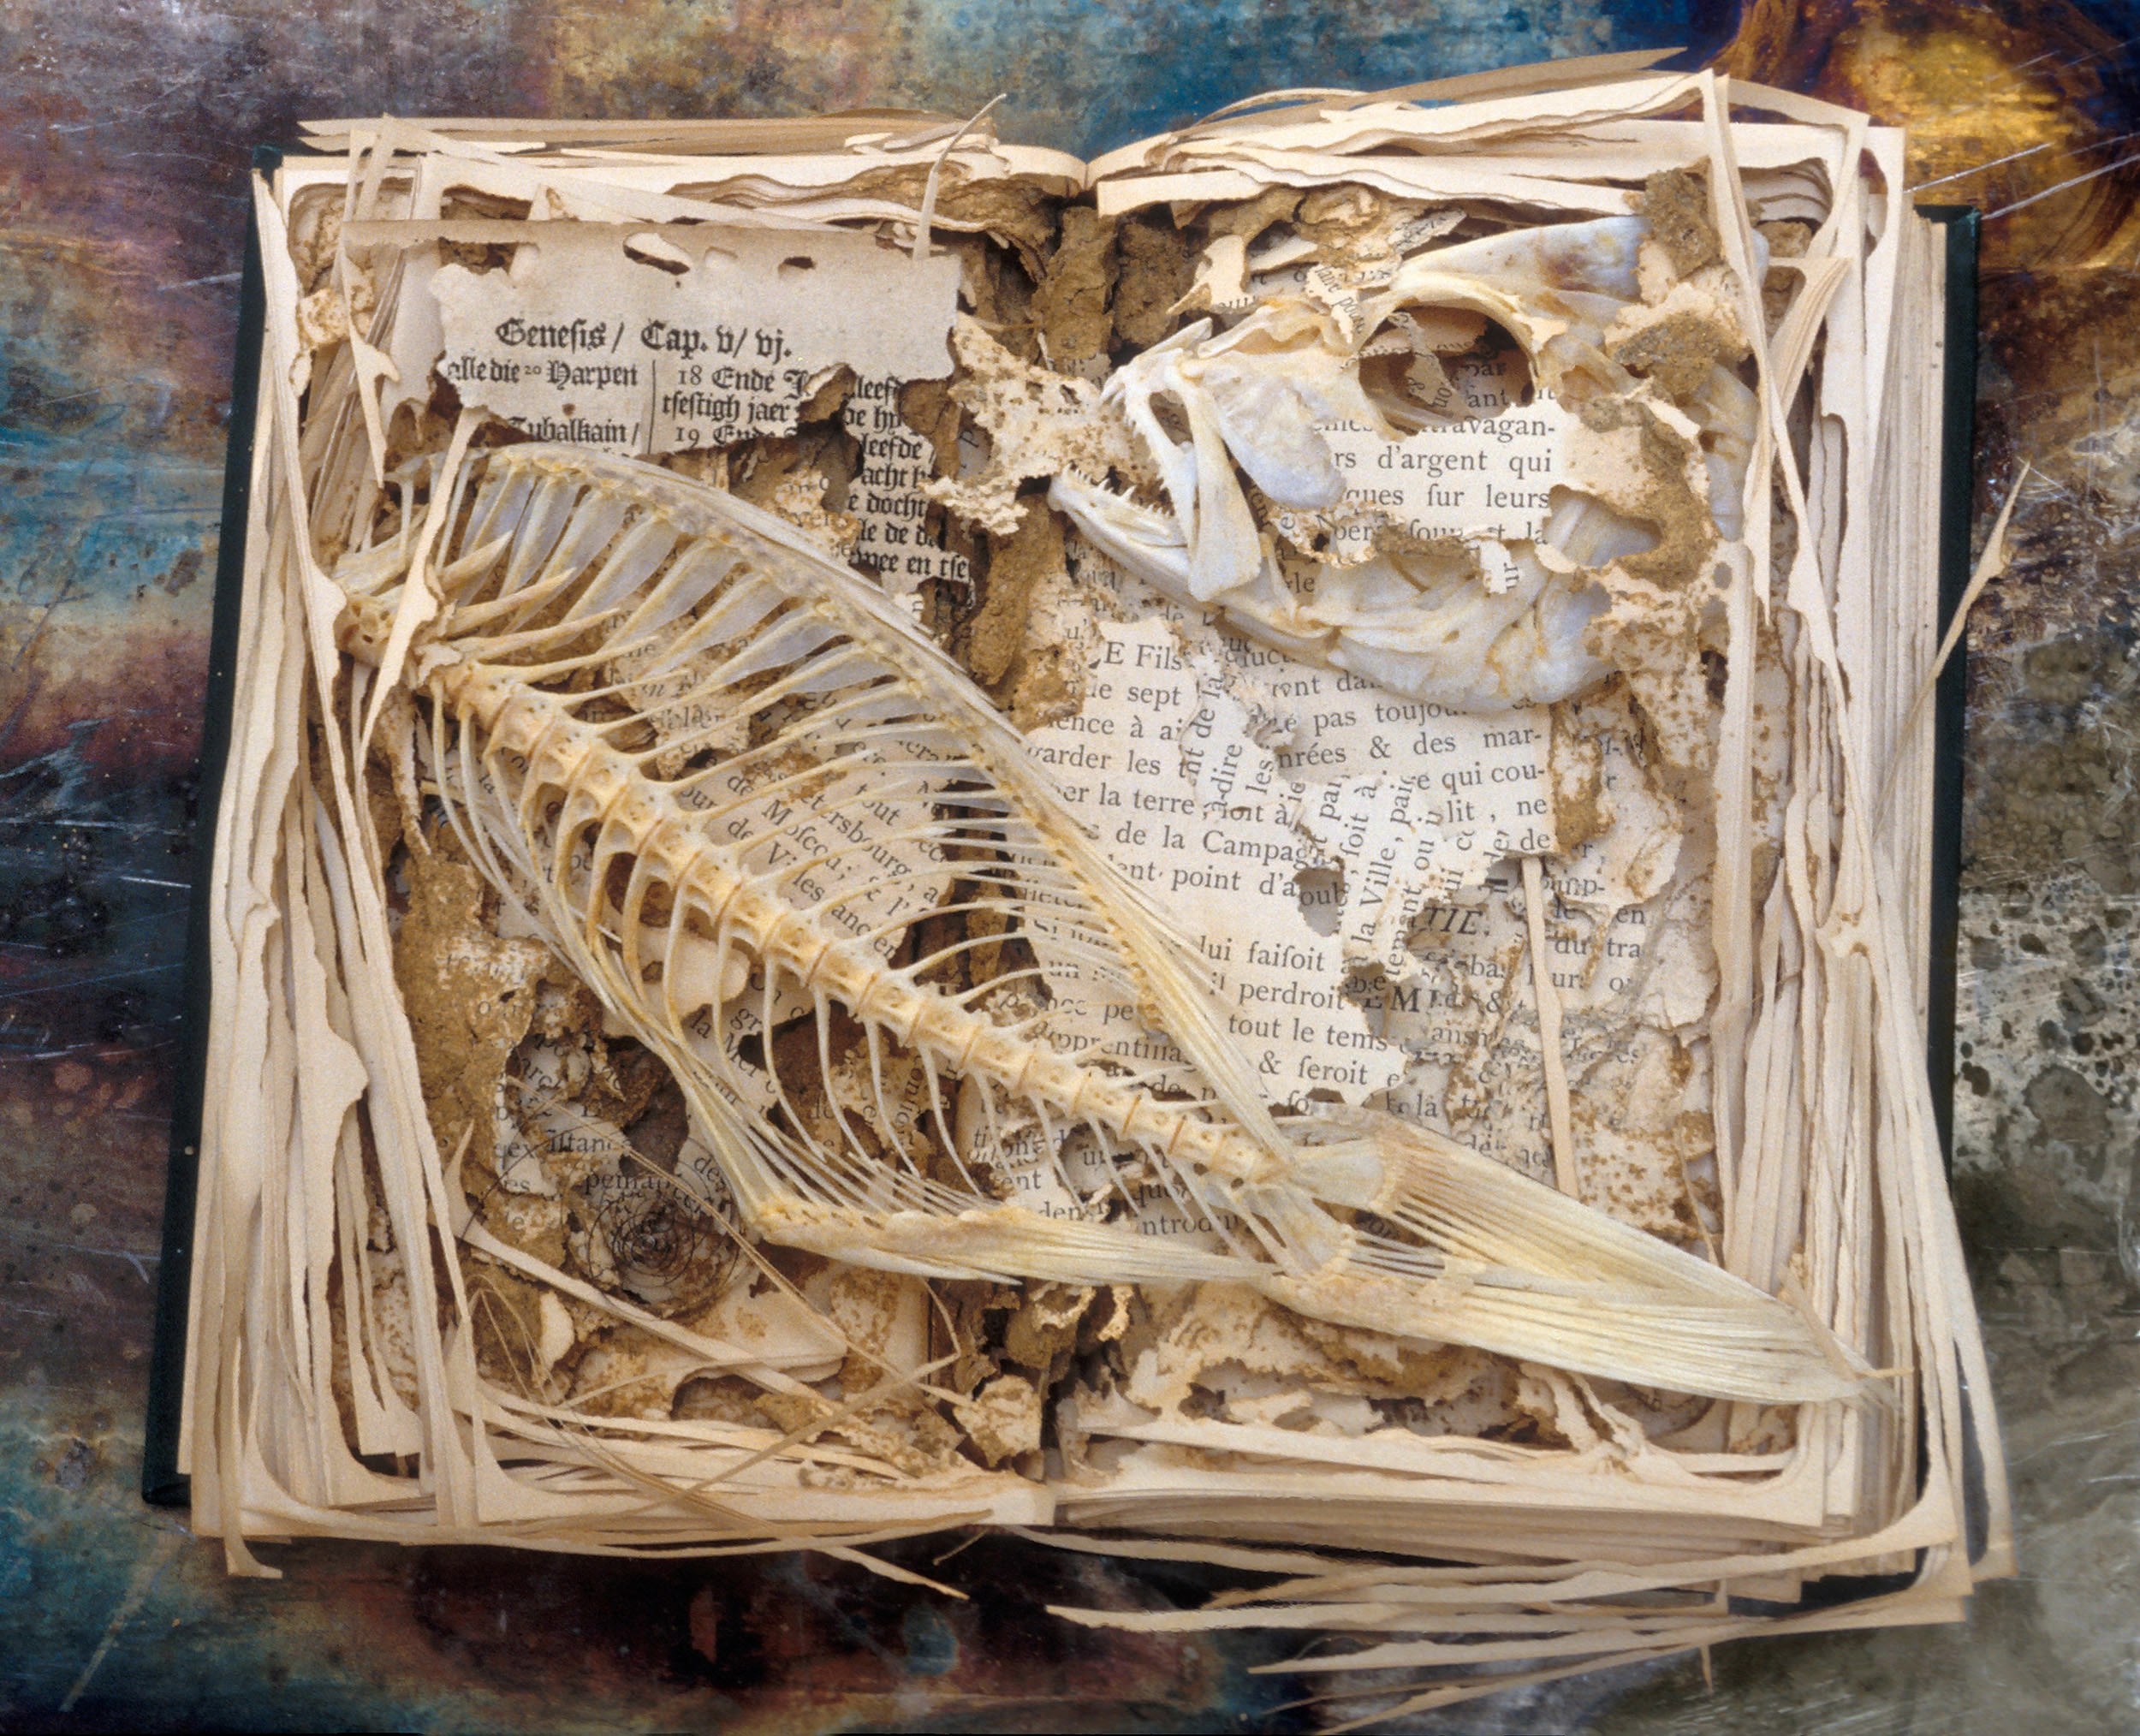 Fish bones placed on top of termite-damaged book.